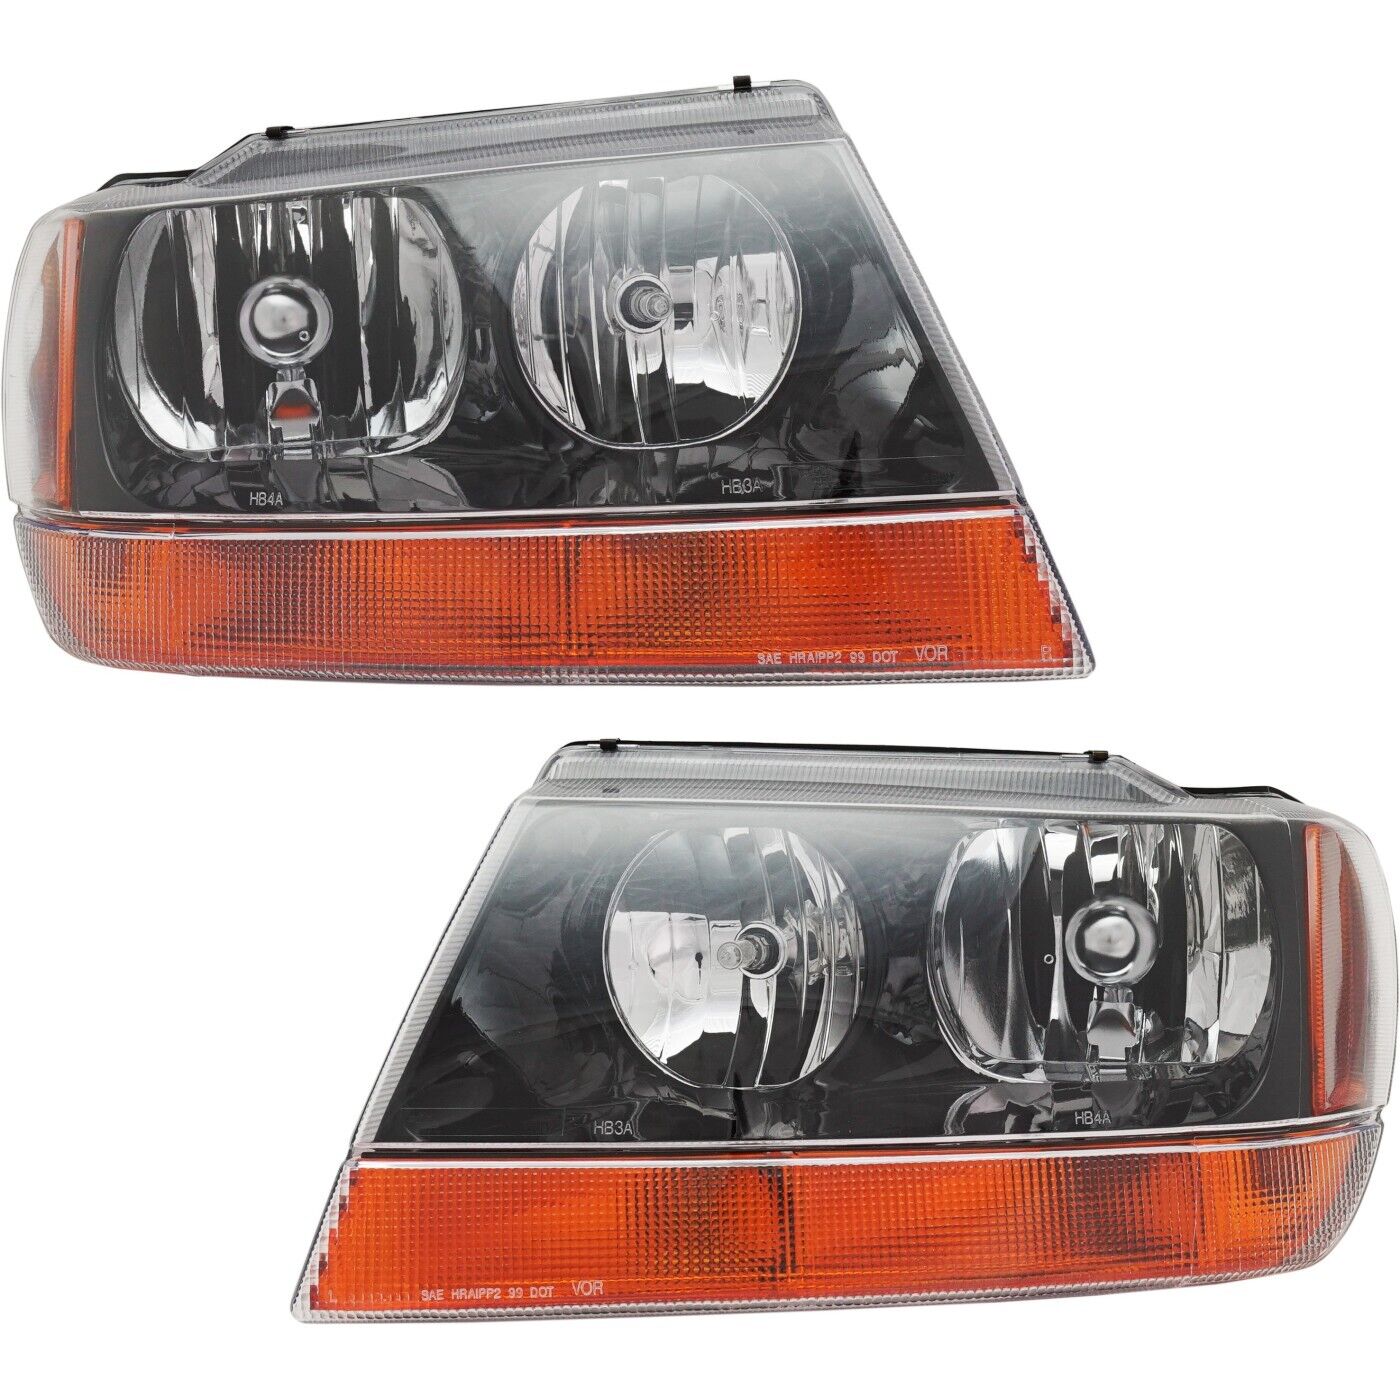 Headlight Set For 99-2004 Grand Cherokee LH and RH Black with Amber Signal Lens